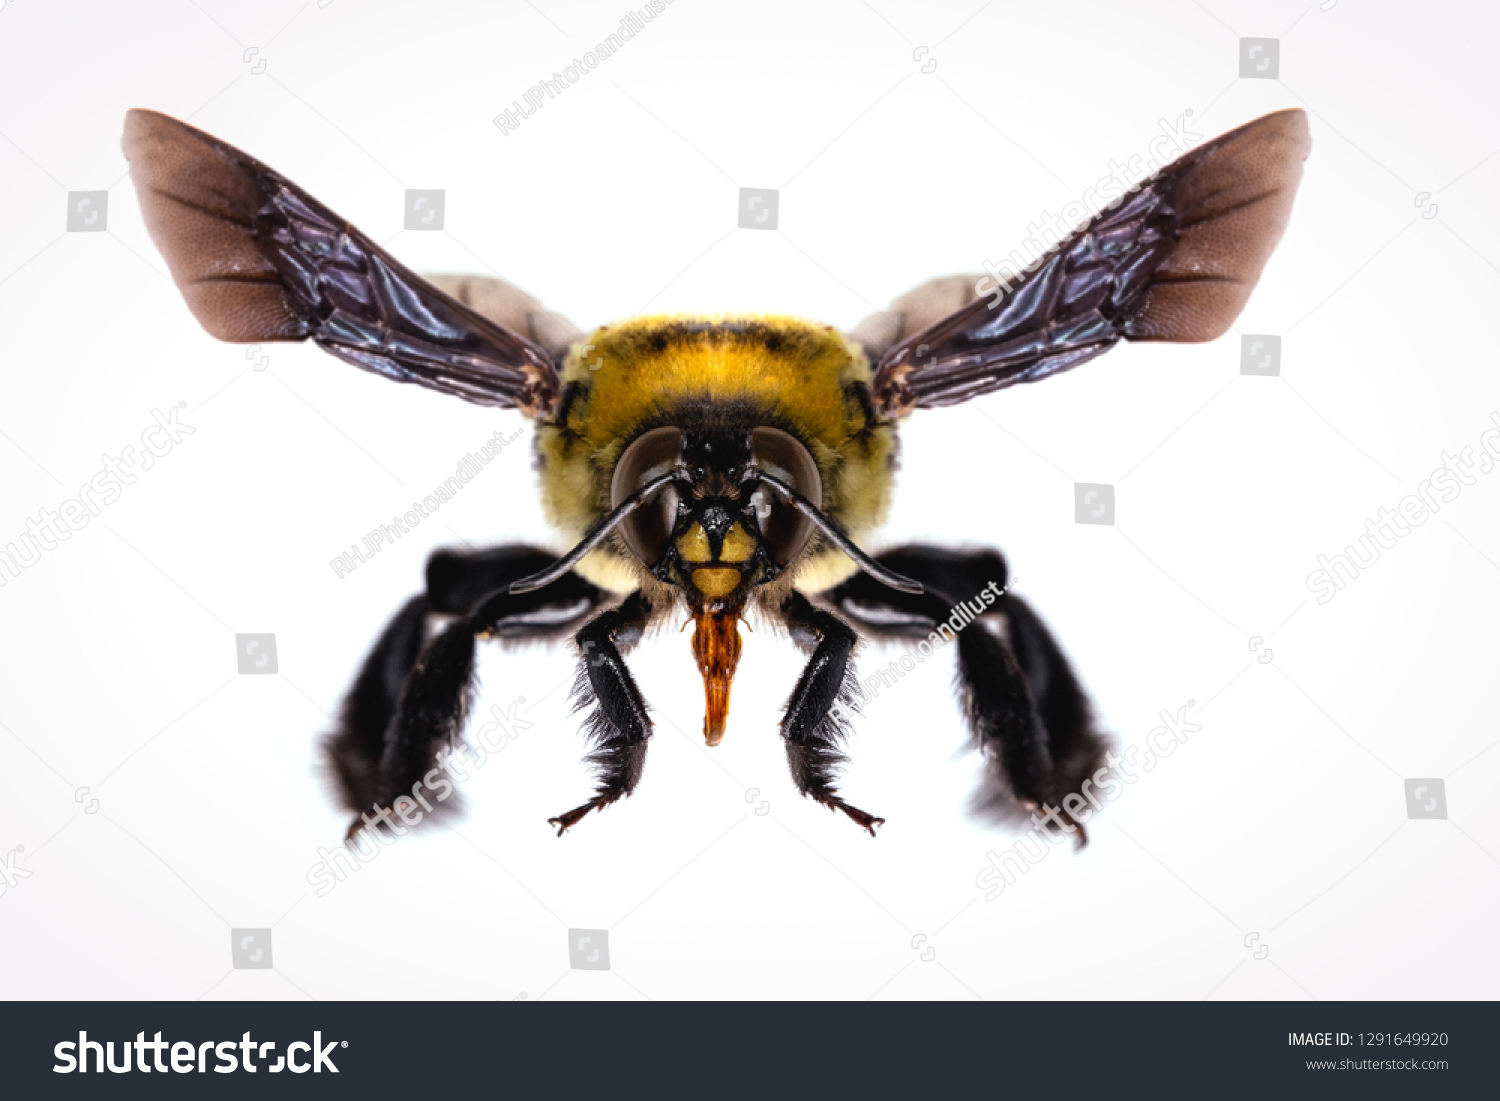 picture of bees on white background, bee on backs flying and other details, macro photography of insects #1291649920